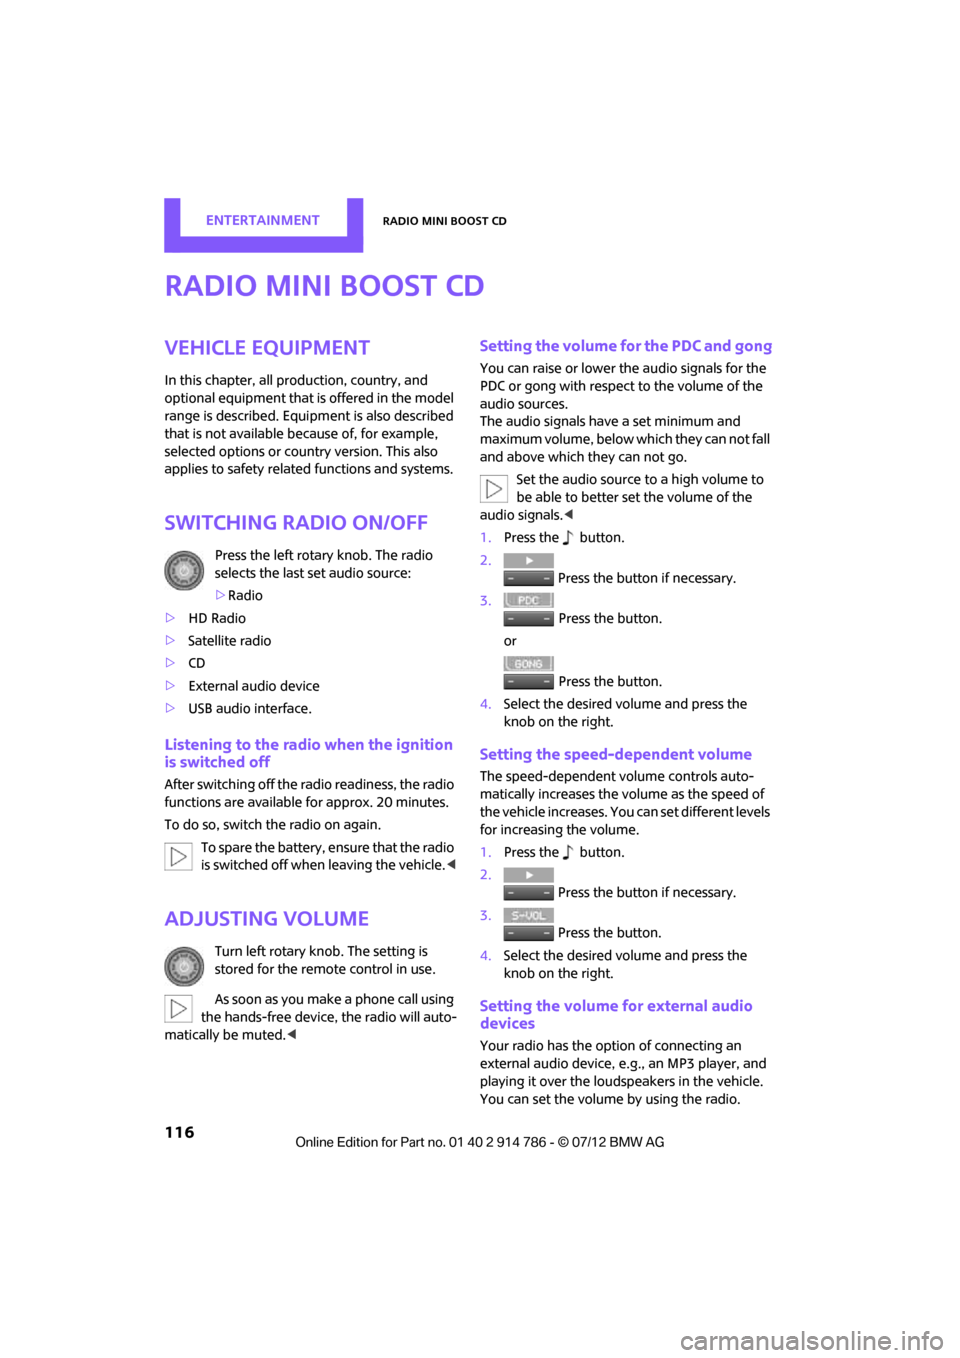 MINI Coupe 2012 User Guide ENTERTAINMENTRadio MINI Boost CD
116
Radio MINI Boost CD
Vehicle equipment
In this chapter, all production, country, and 
optional equipment that is offered in the model 
range is described. Equipment